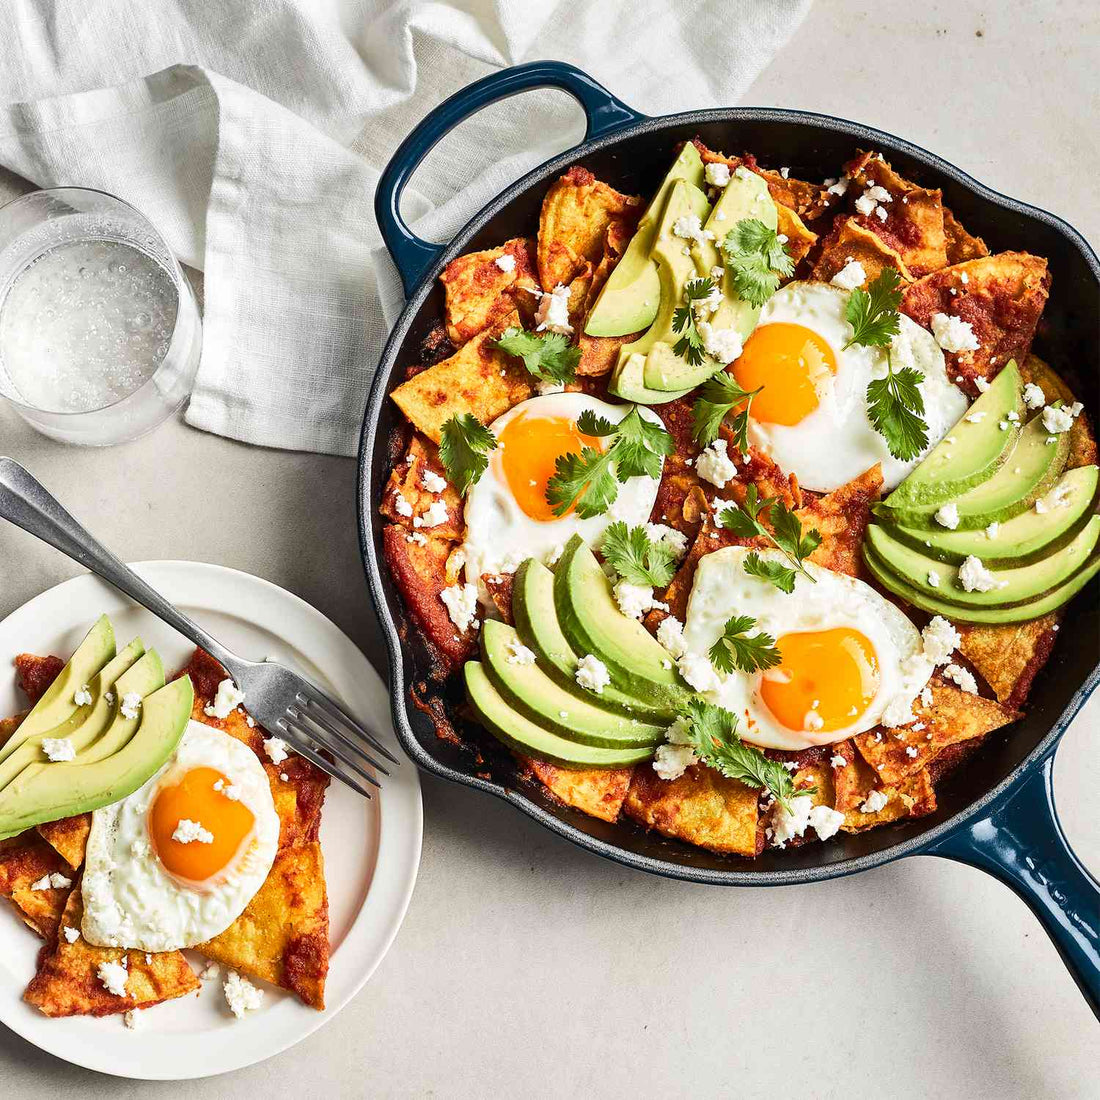 Chilaquiles - with ranchero sauce